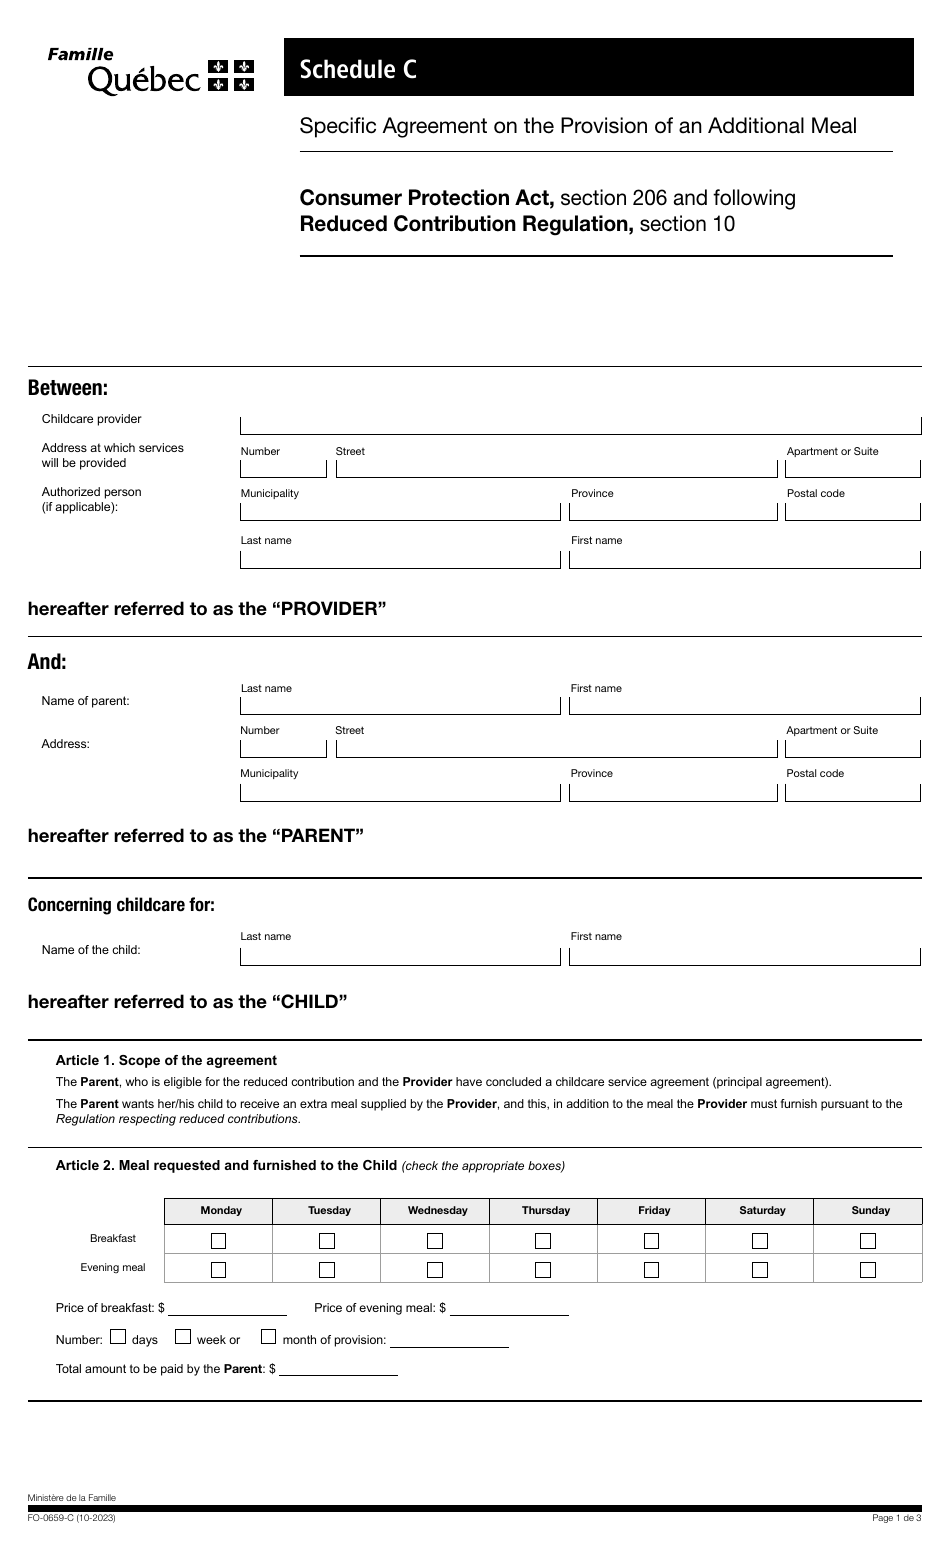 Form FO-0659-C Schedule C Specifc Agreement on the Provision of an Additional Meal - Quebec, Canada, Page 1